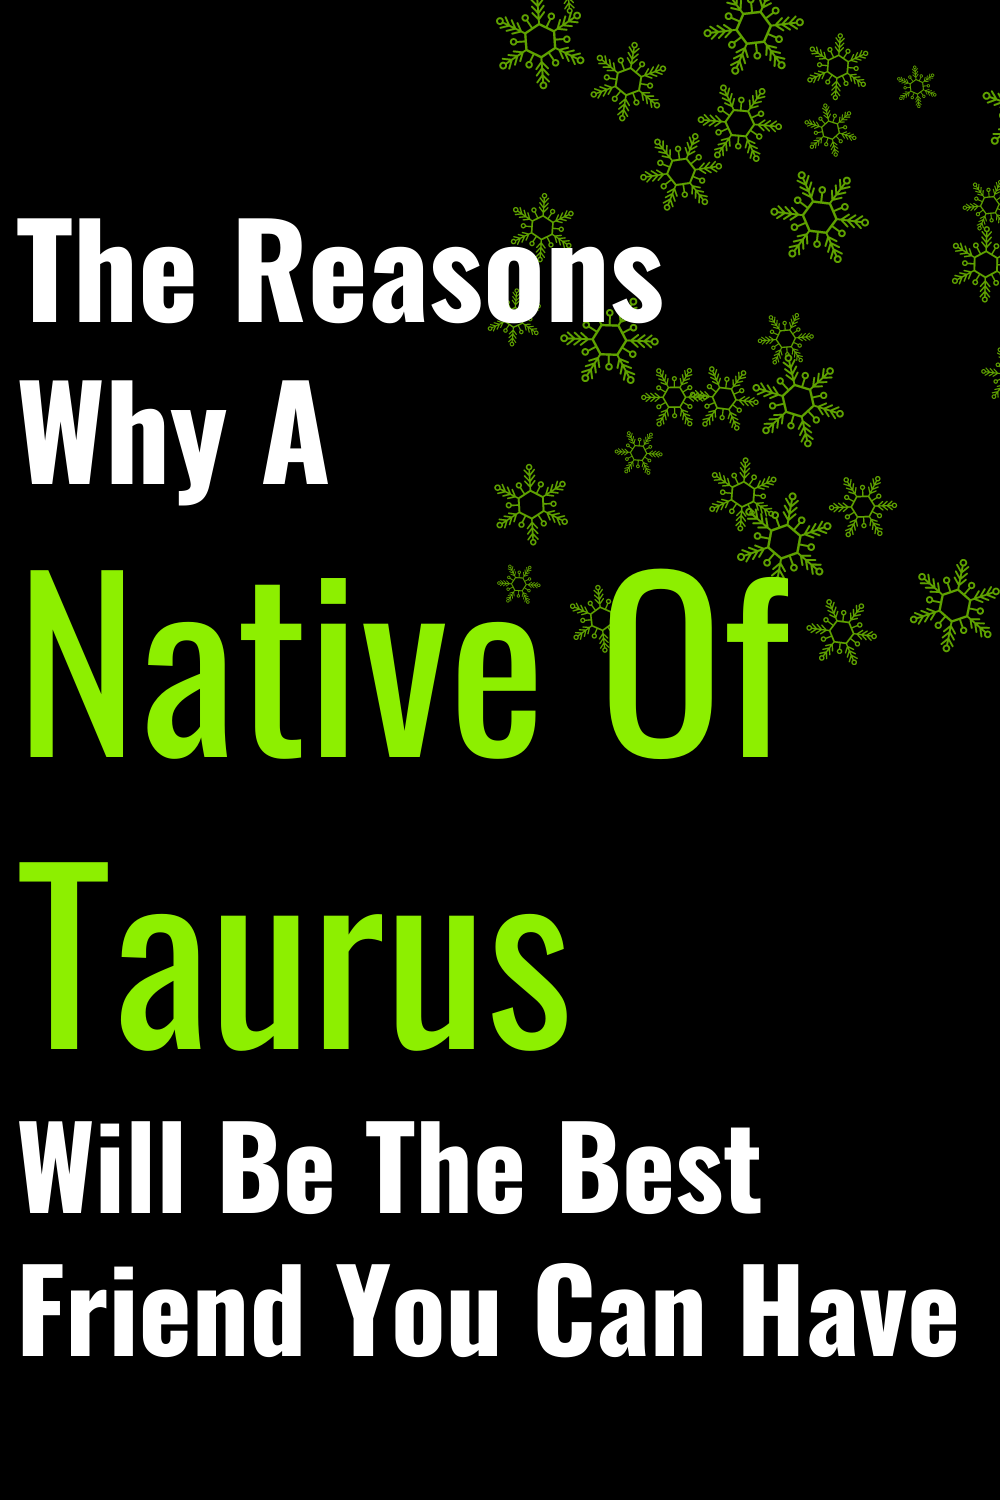 The Reasons Why A Native Of Taurus Will Be The Best Friend You Can Have